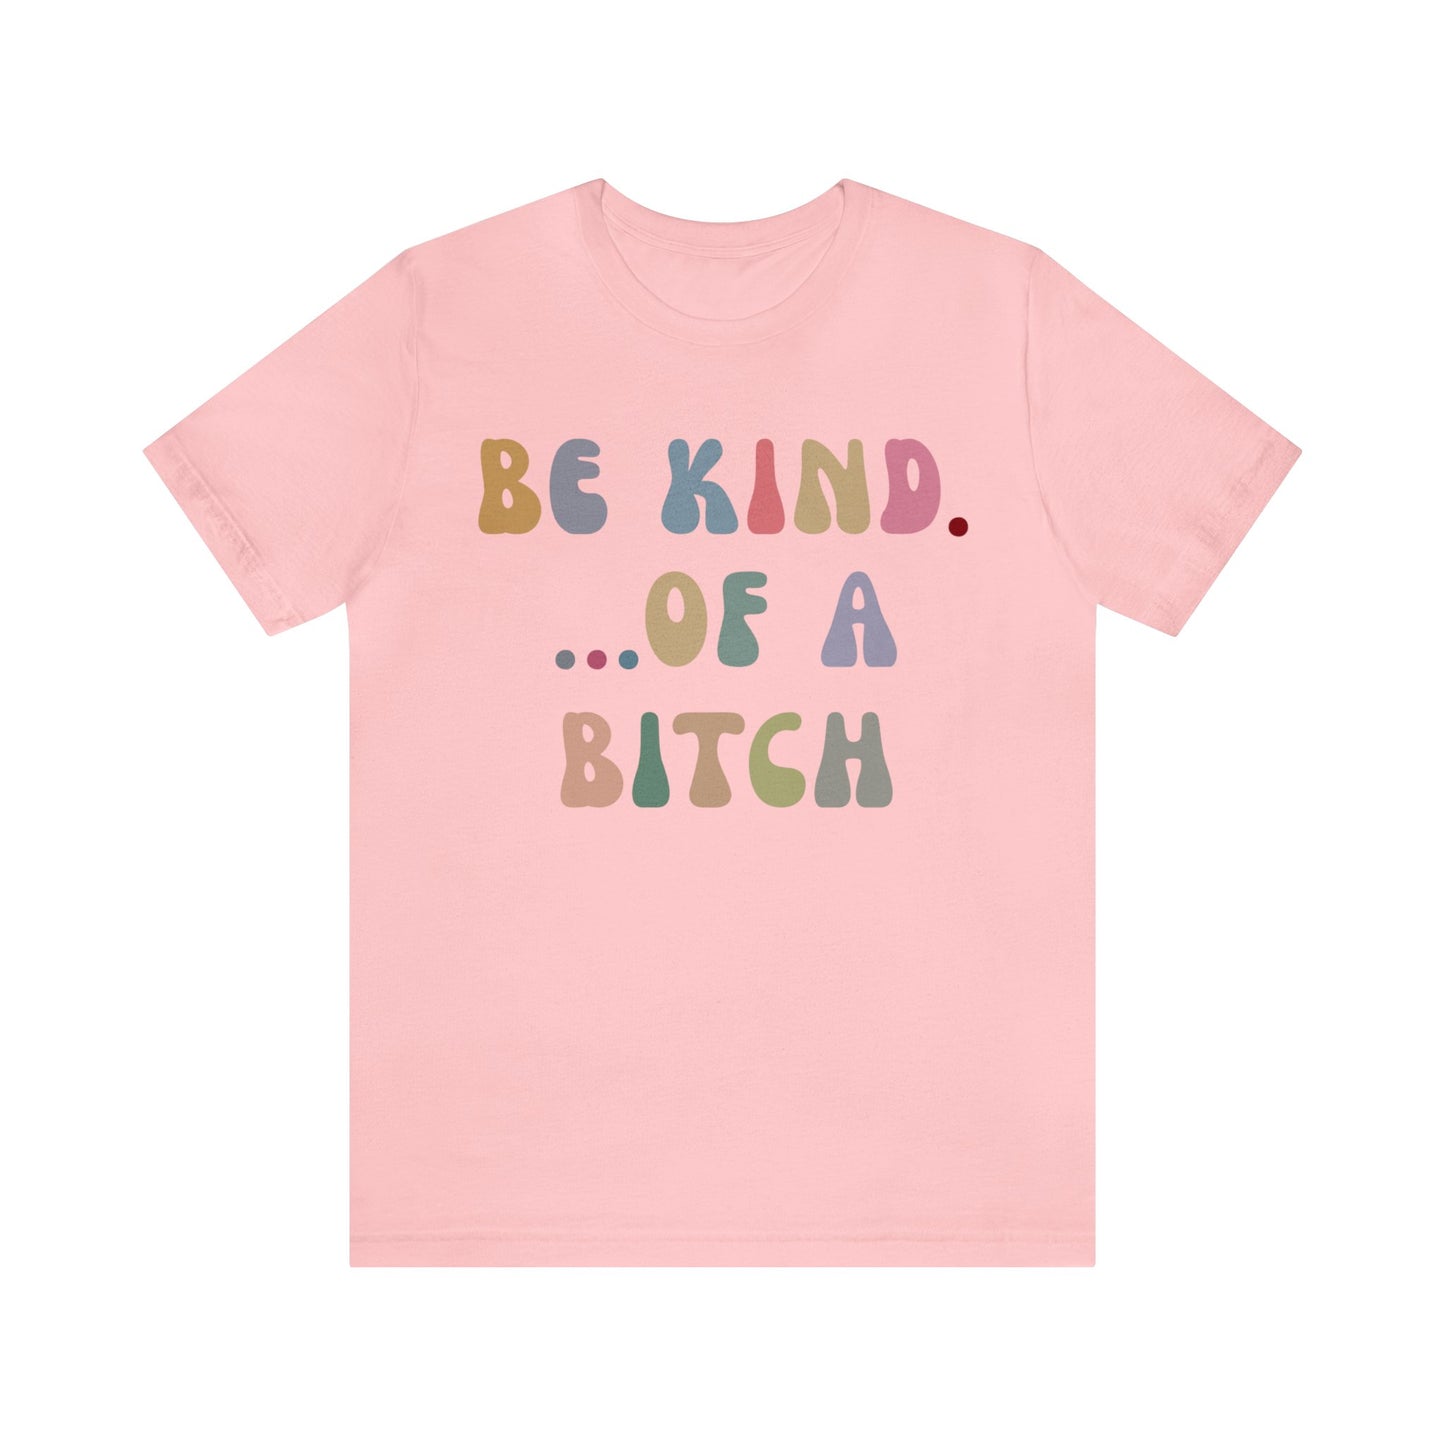 Be Kind Of A Bitch Shirt, Funny Girls Shirt, Funny Sassy Shirt, Sarcasm Shirt for Women, Funny Gift for Friends, Gift For Girls, T1198